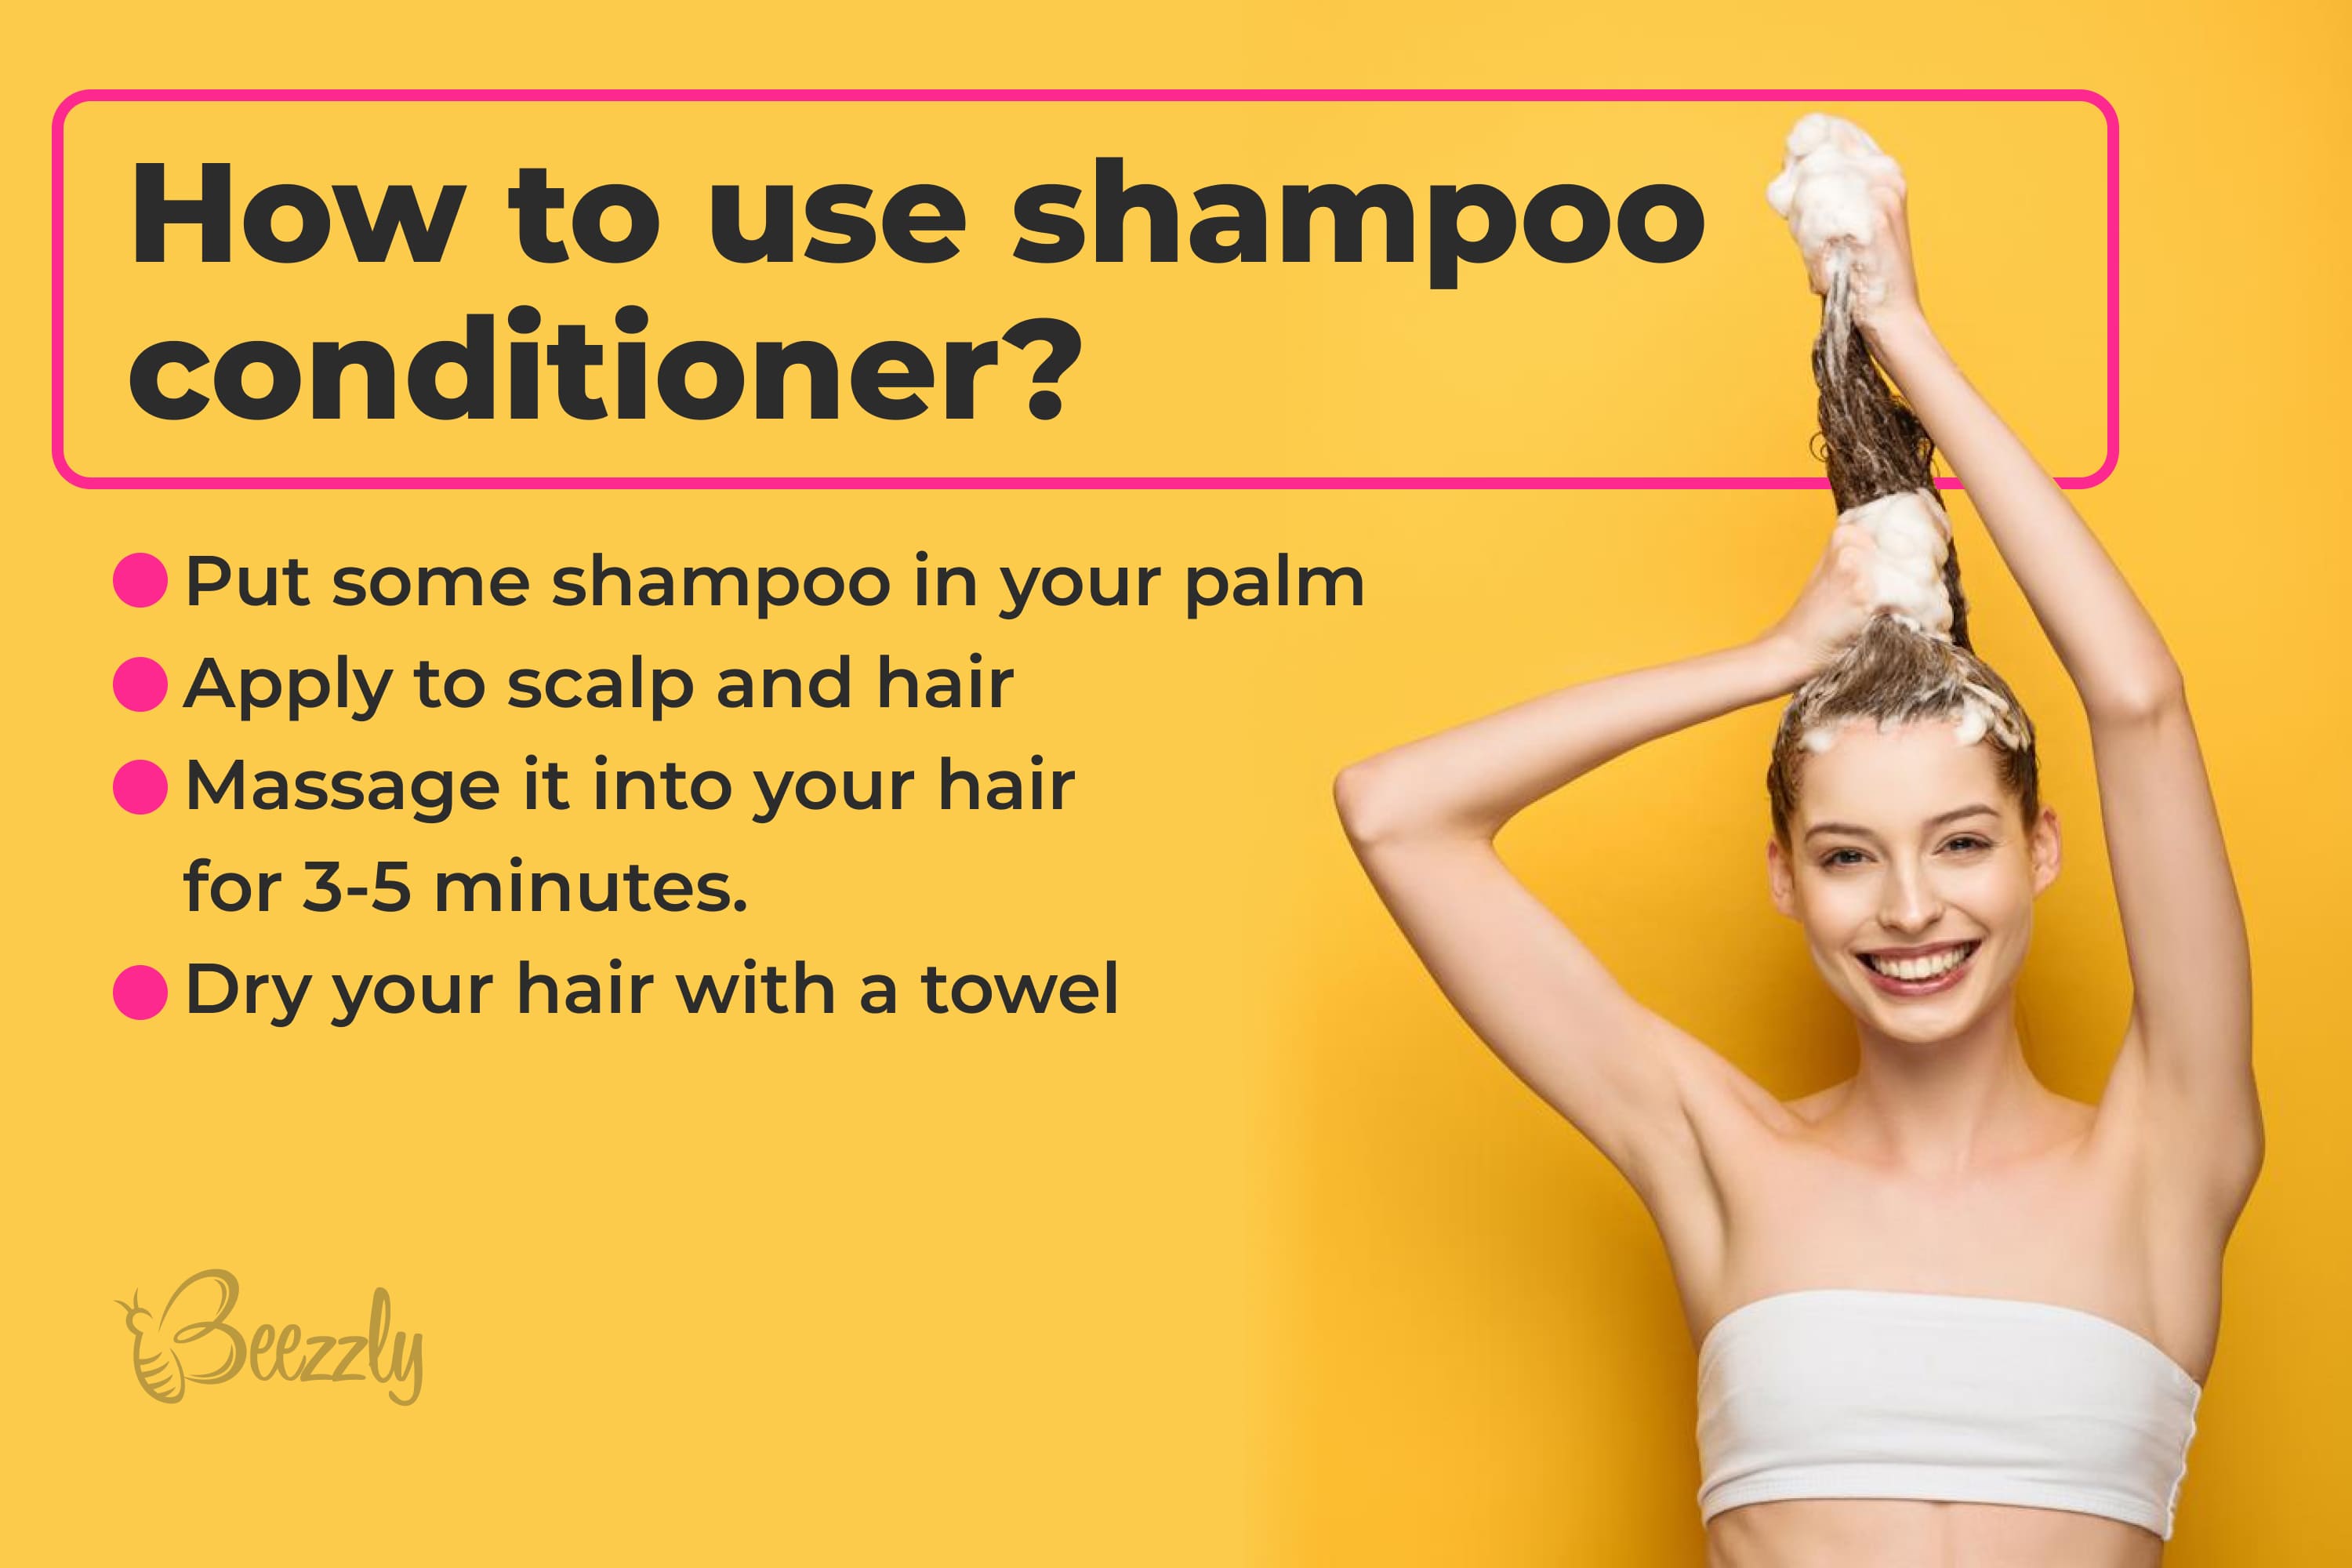 How to use shampoo conditioner